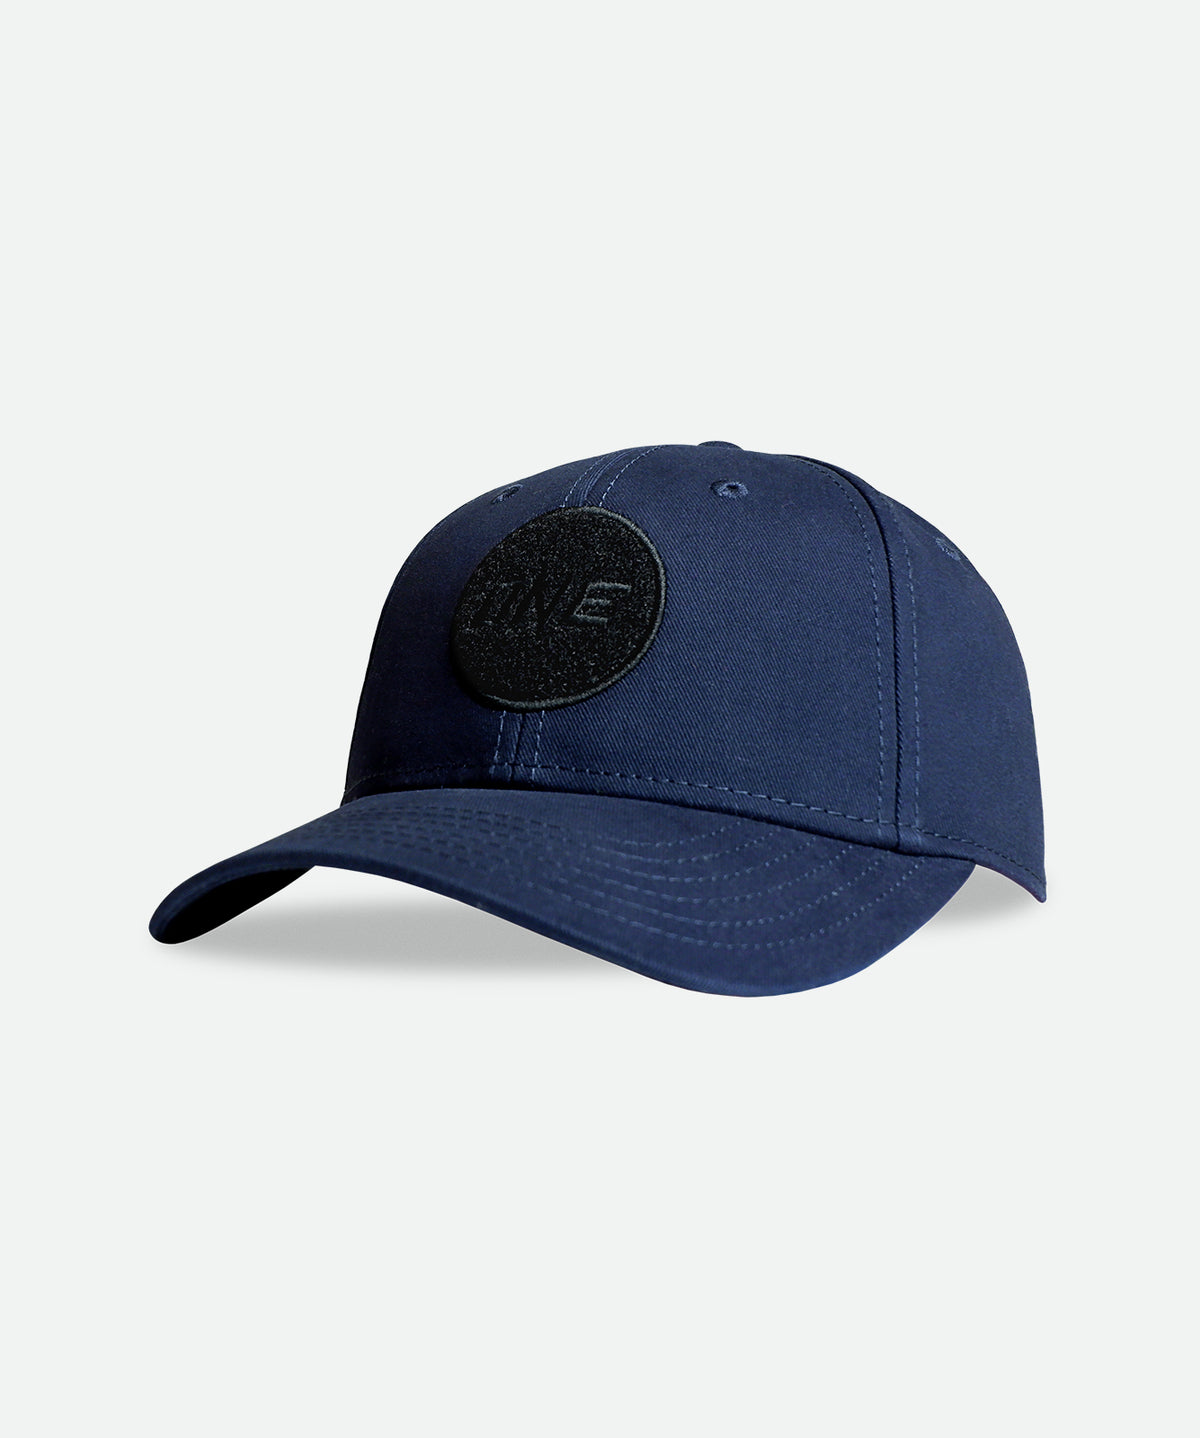 ONE Hero Cap (Navy) - ONE.SHOP | The Official Online Shop of ONE Championship